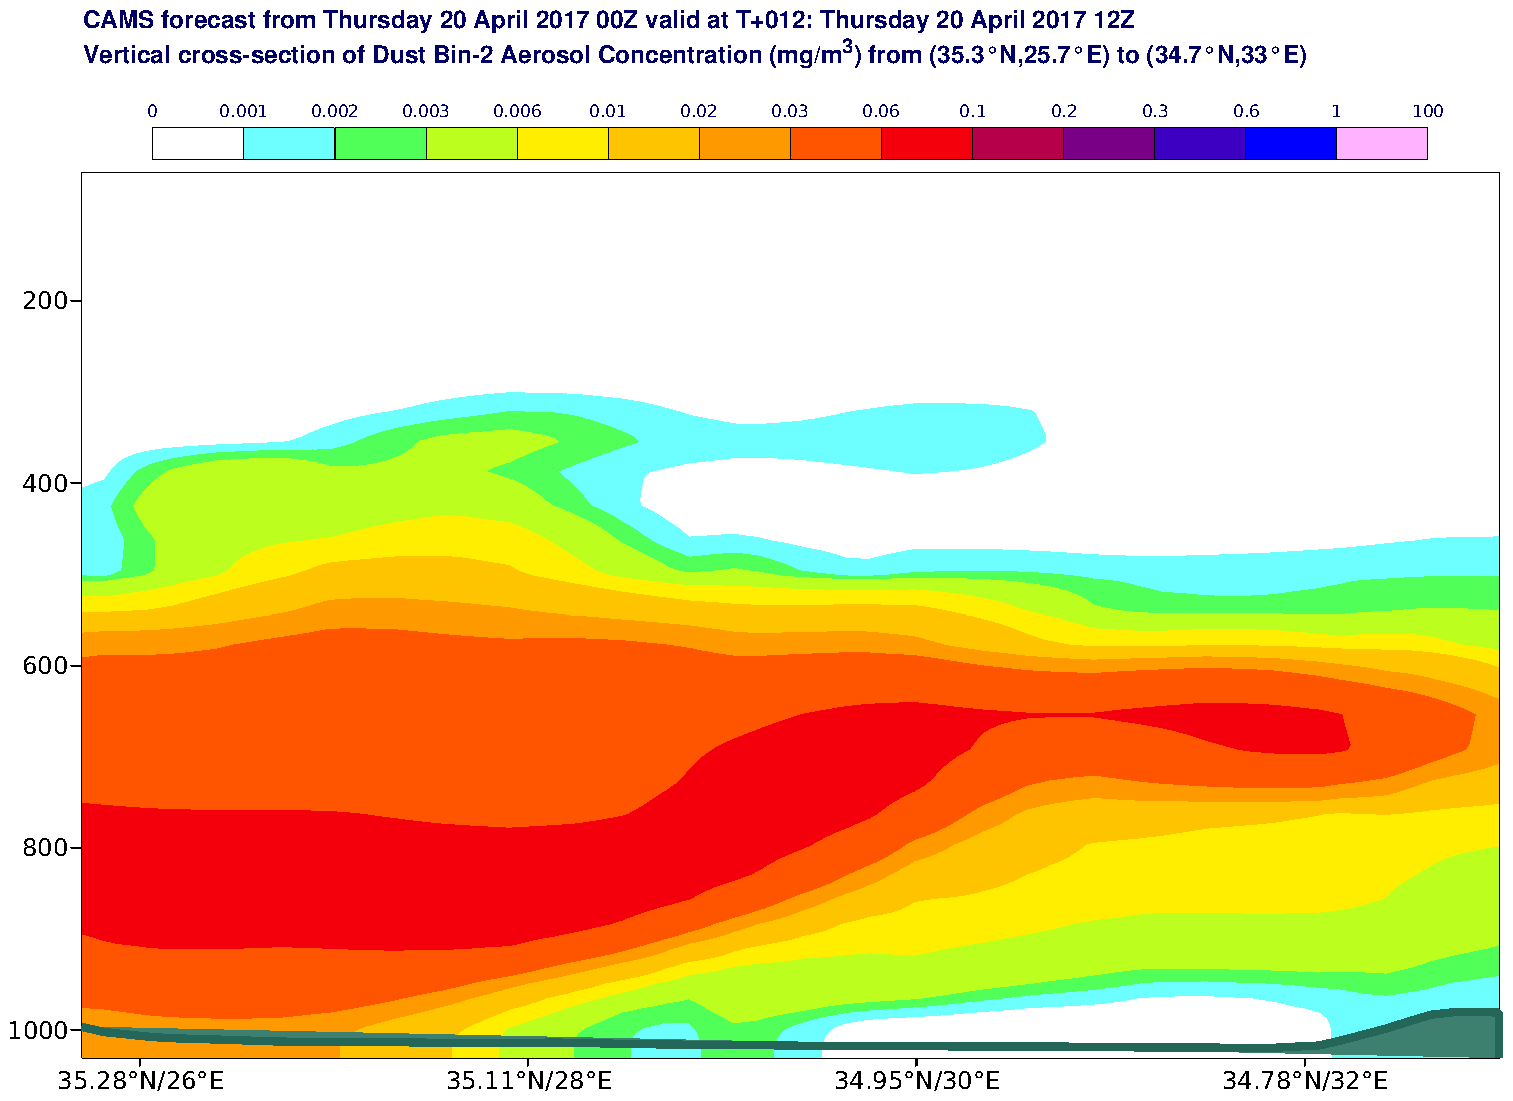 Vertical cross-section of Dust Bin-2 Aerosol Concentration (mg/m3) valid at T12 - 2017-04-20 12:00